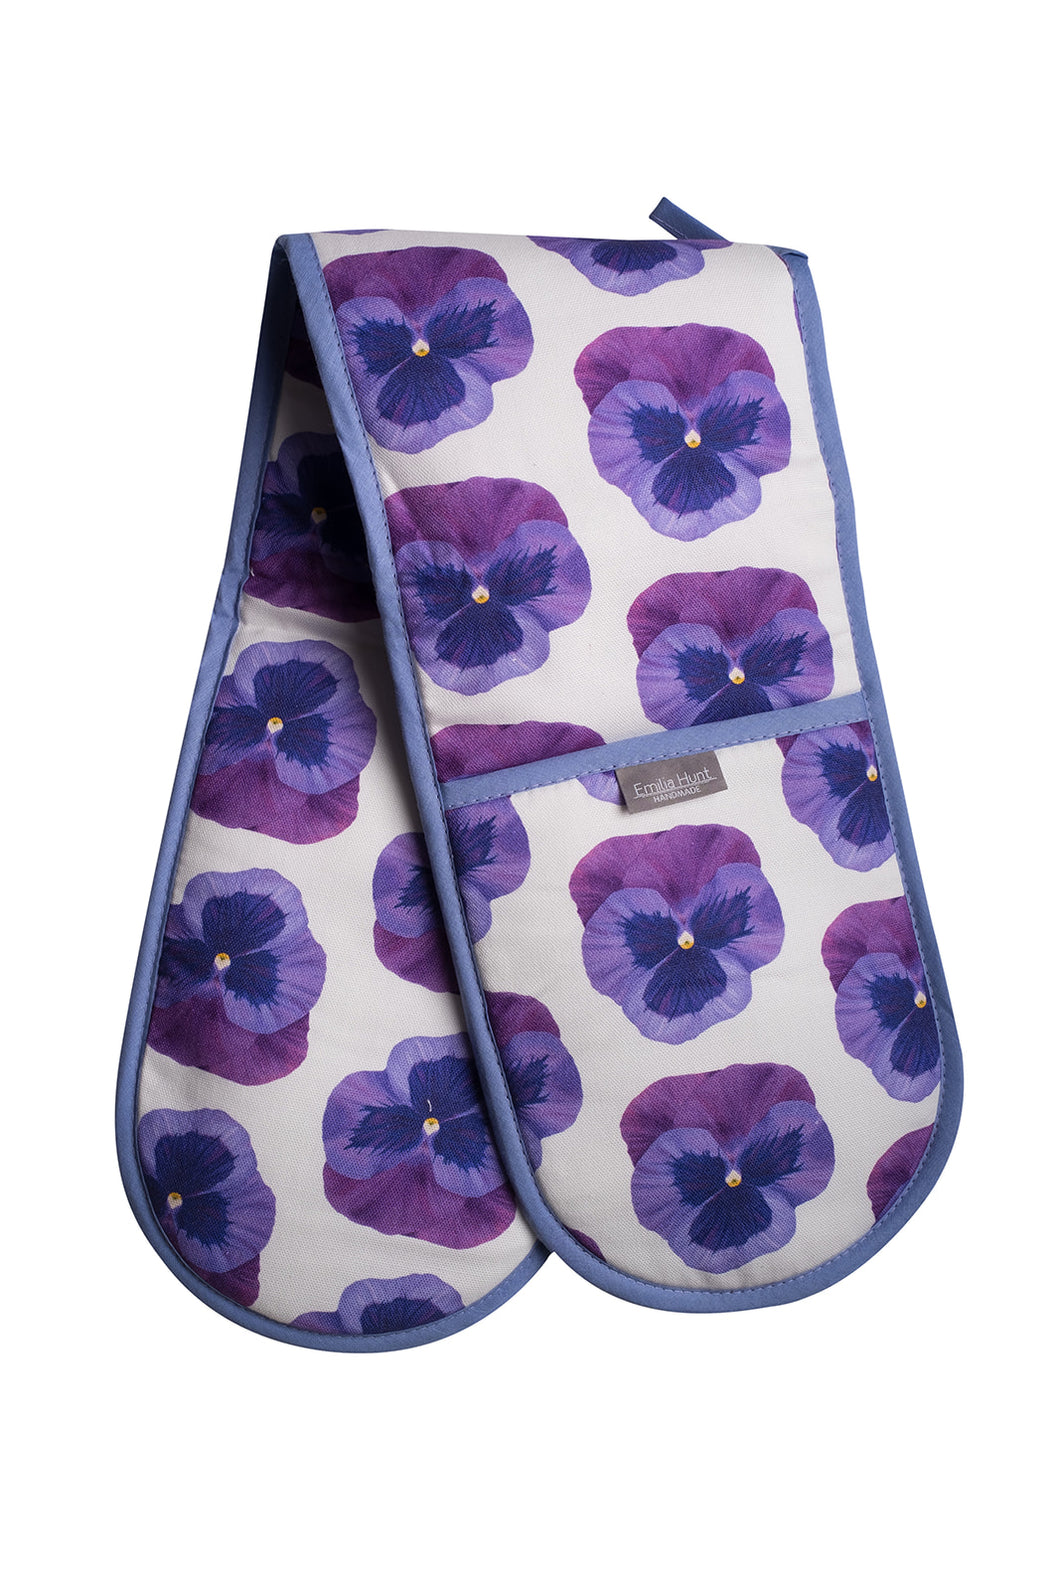 Pansy Double Oven Gloves